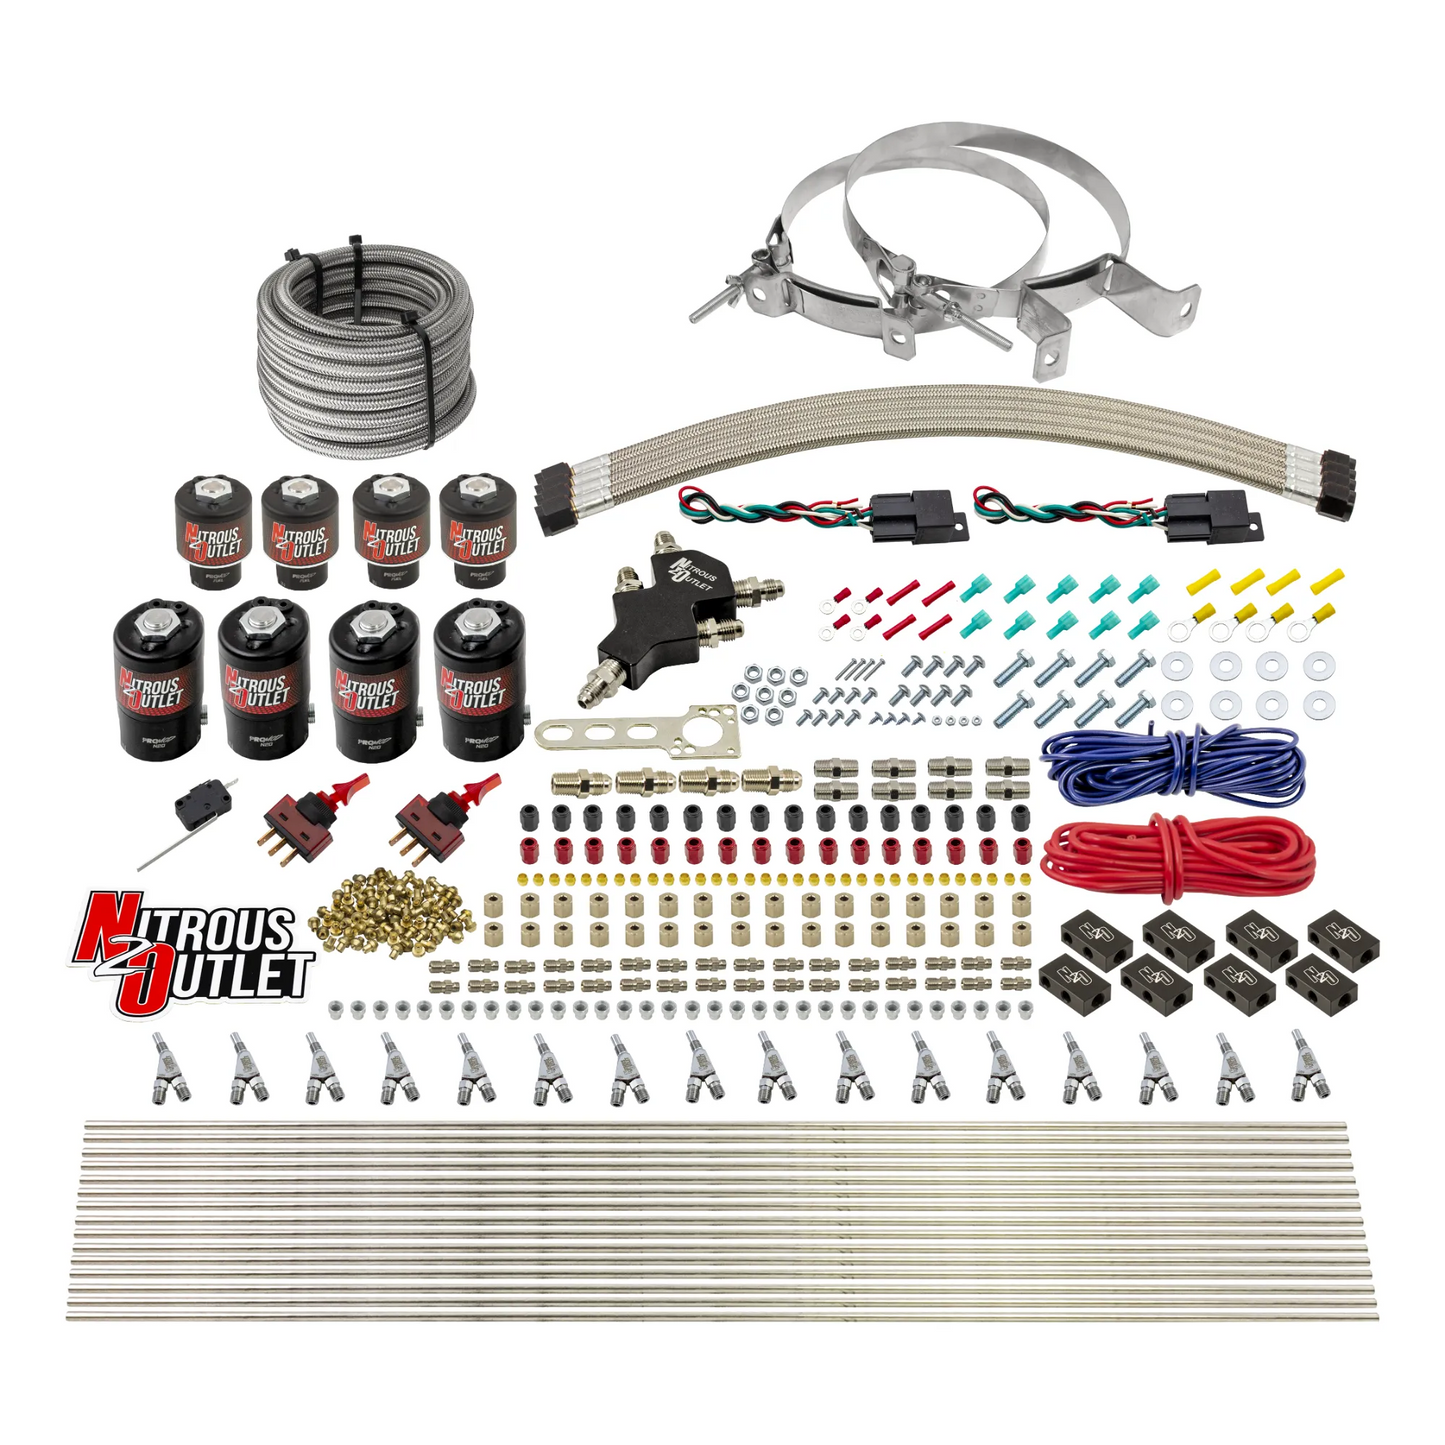 8 Cylinder Dual Stage Direct Port Nitrous System - .112 Nitrous/.177 Fuel Solenoids - Alcohol - Straight Blow Through Nozzles